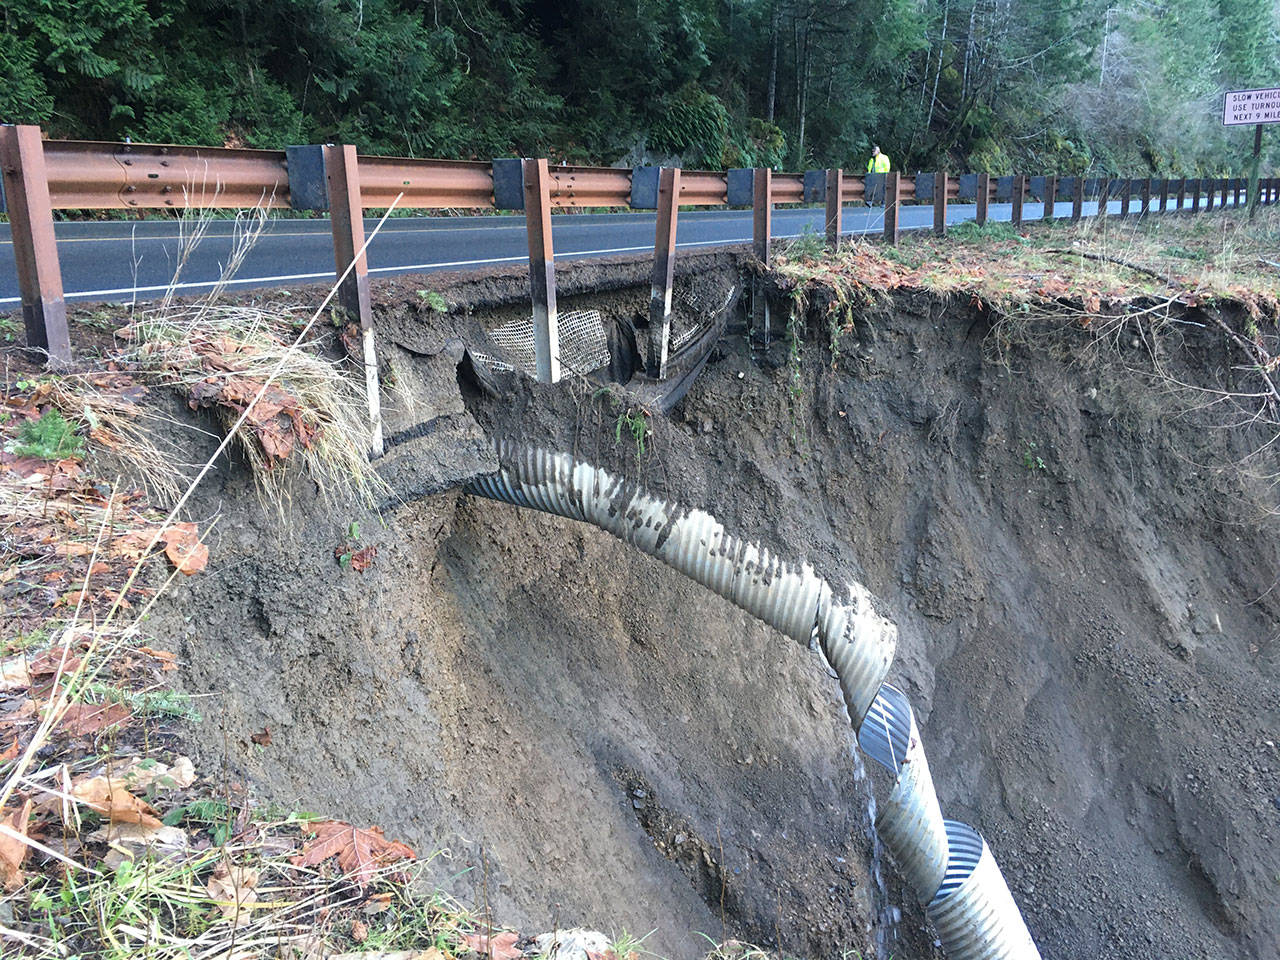 A section of U.S Highway 101 going around Lake Crescent is single lane travel only after recent erosion caused damage to the roadway. Photo courtesy of Washington State Department of Transportation